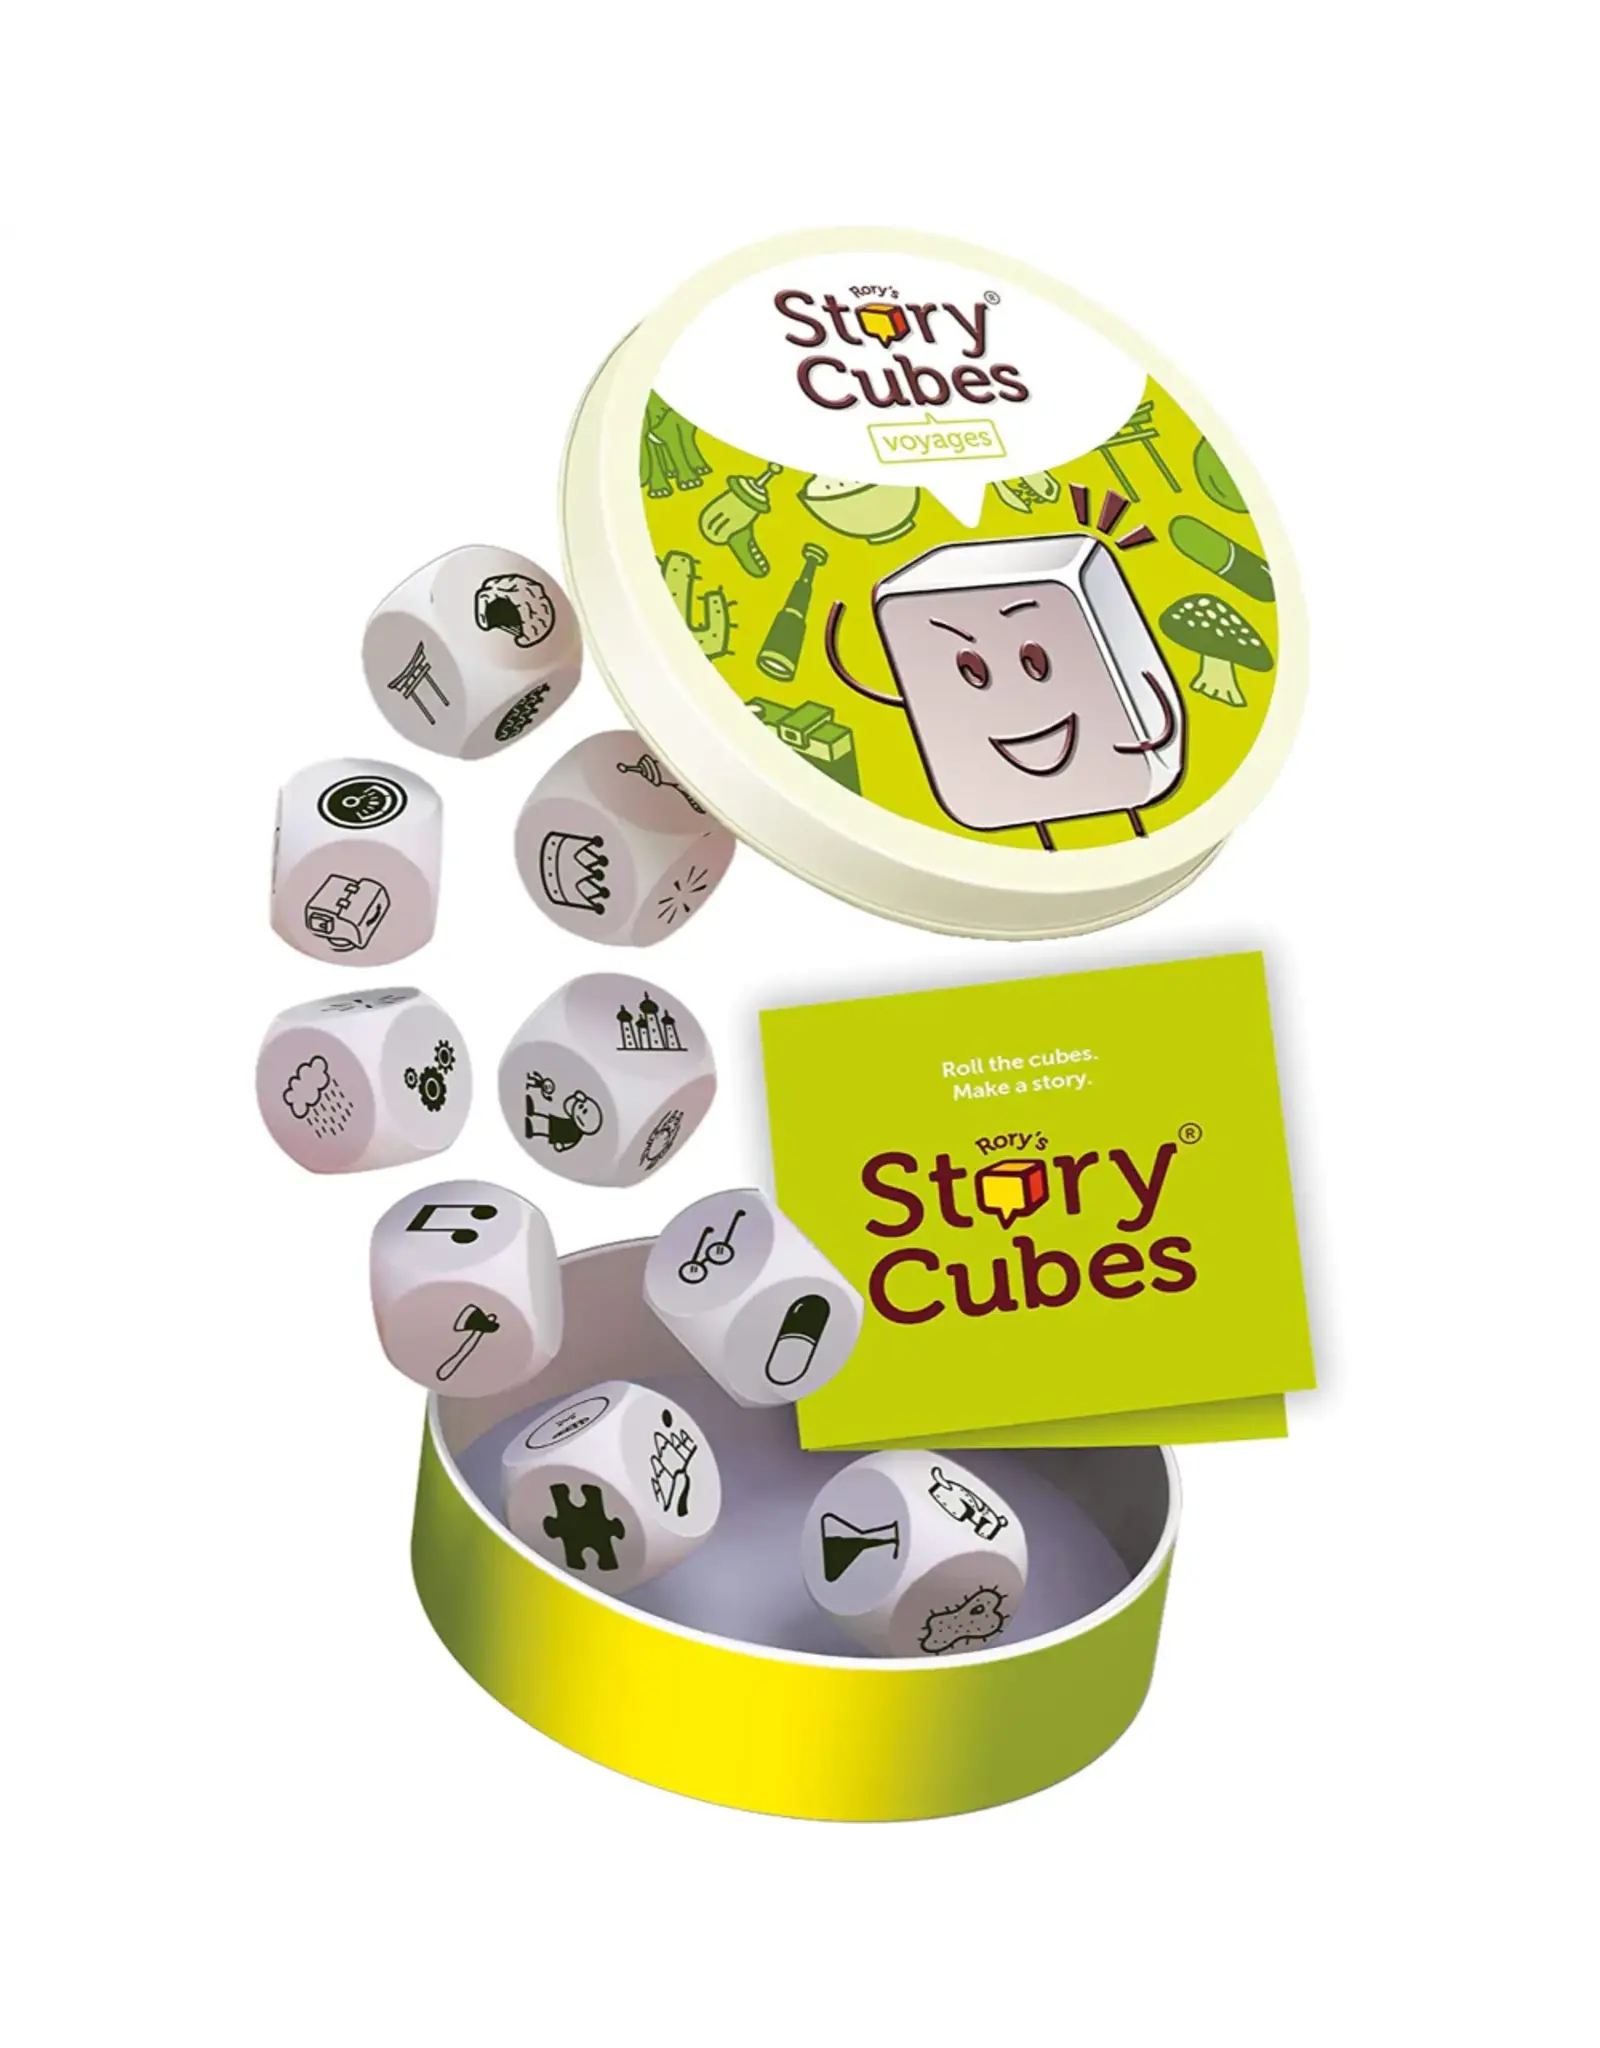 Zygomatic Rory's Story Cubes Voyages